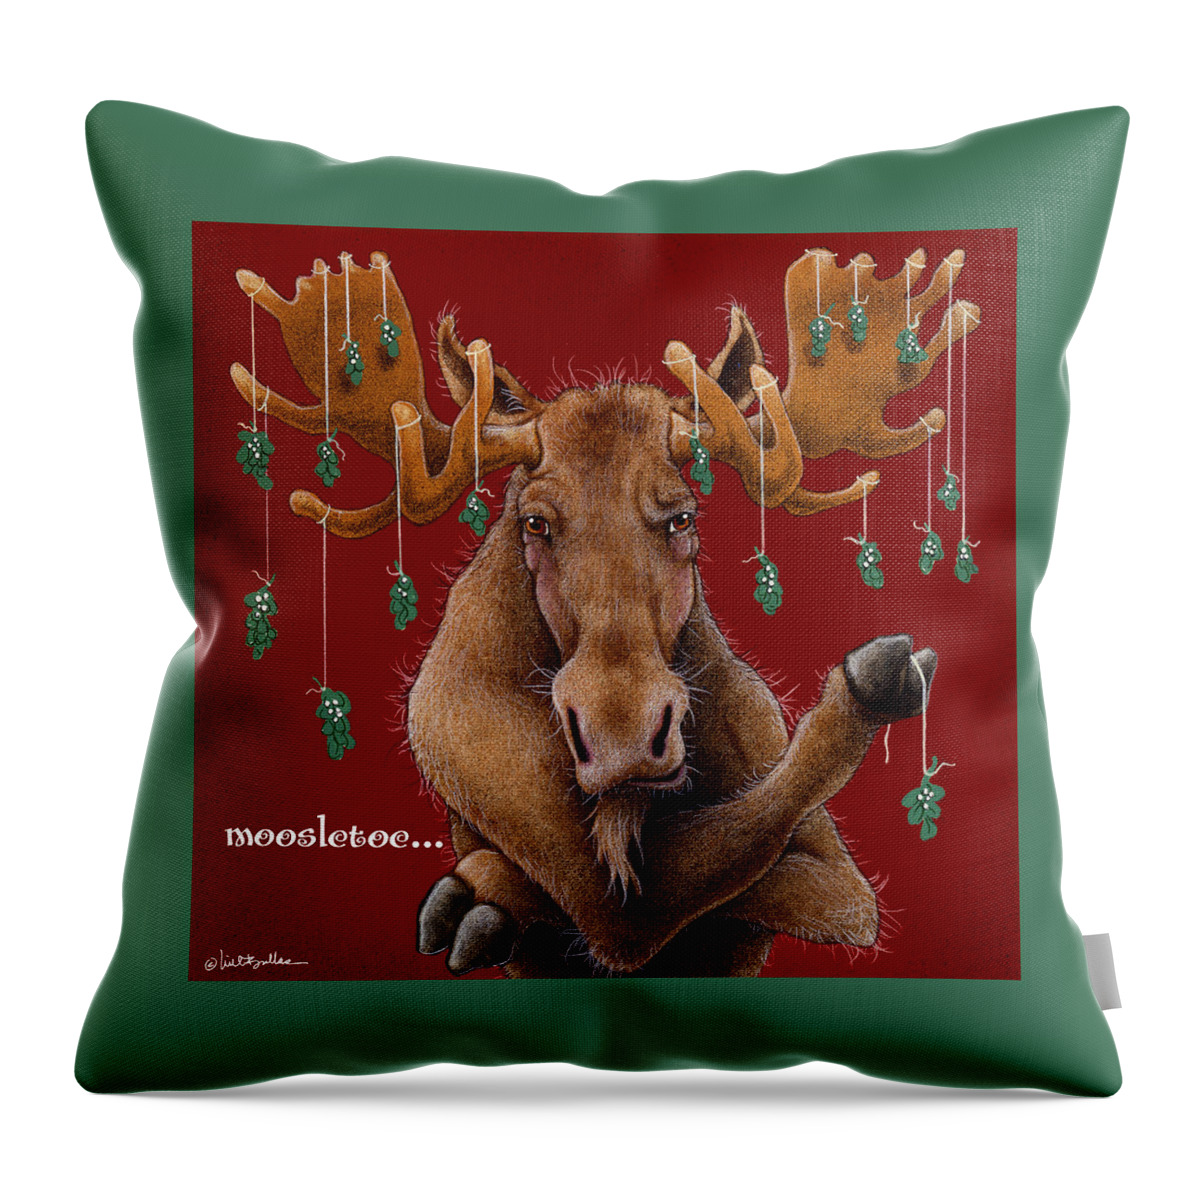 Will Bullas Throw Pillow featuring the painting Moosletoe... #1 by Will Bullas